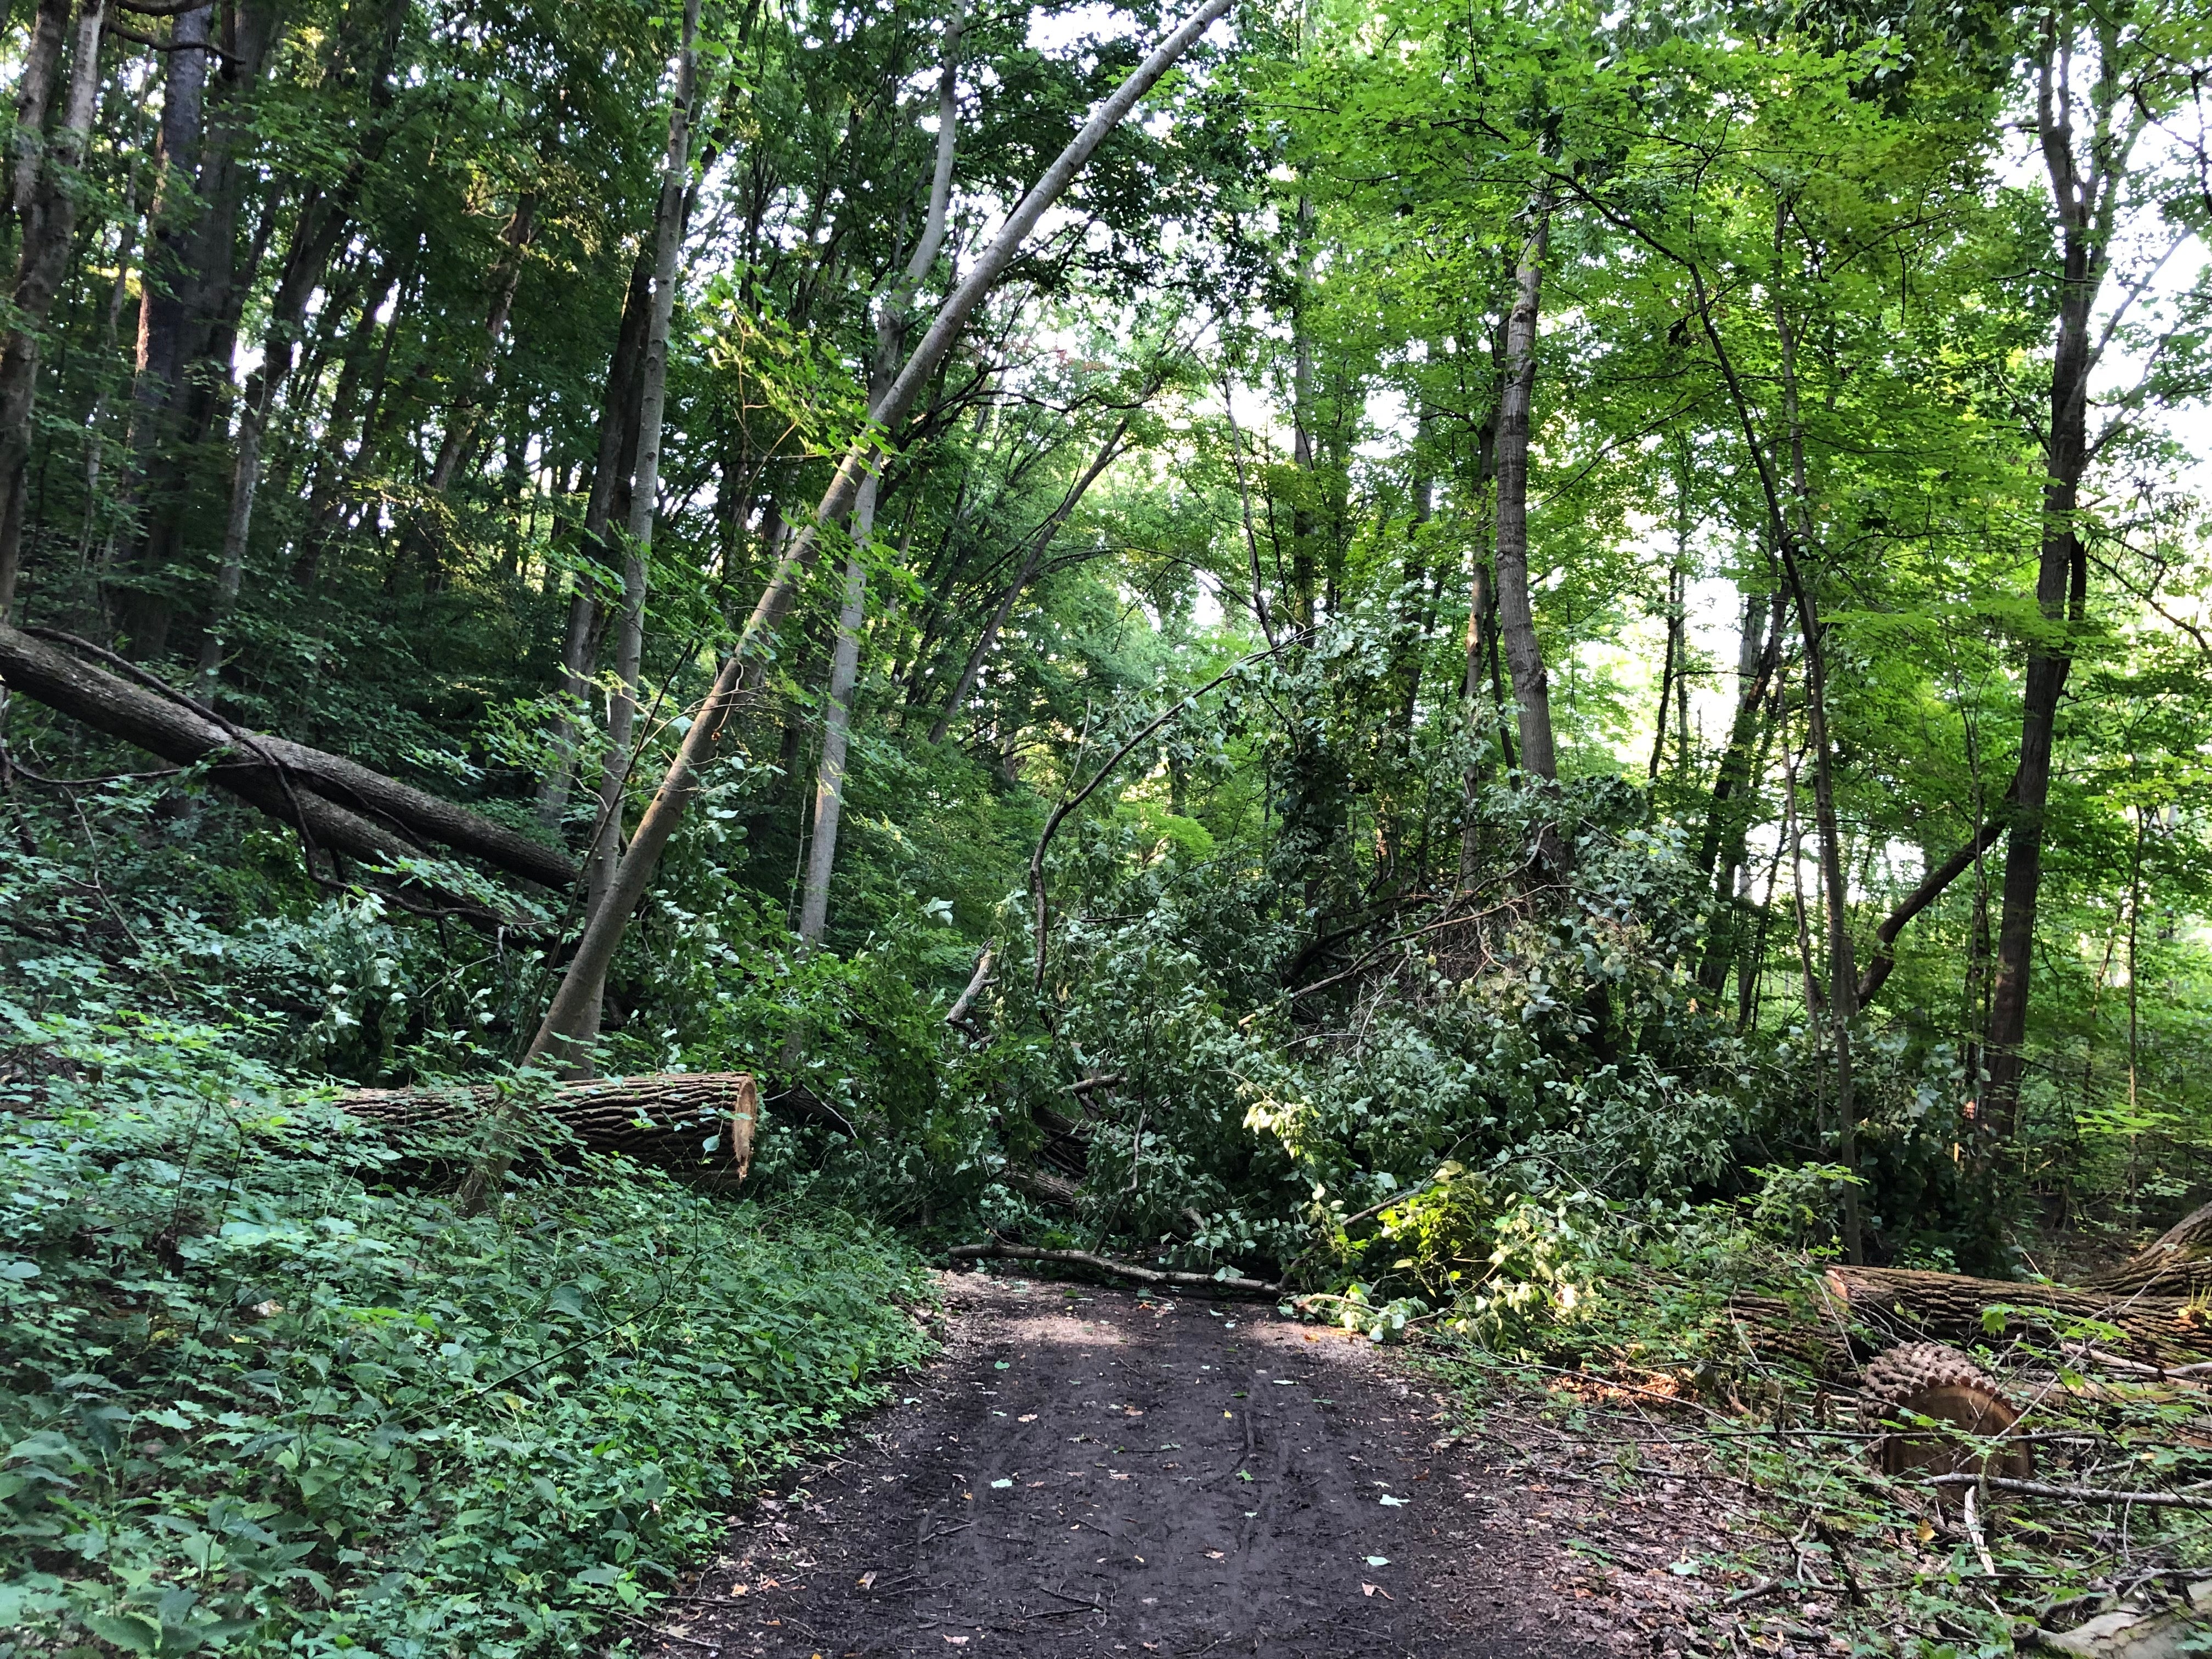 Trees were down on the trail when we visited